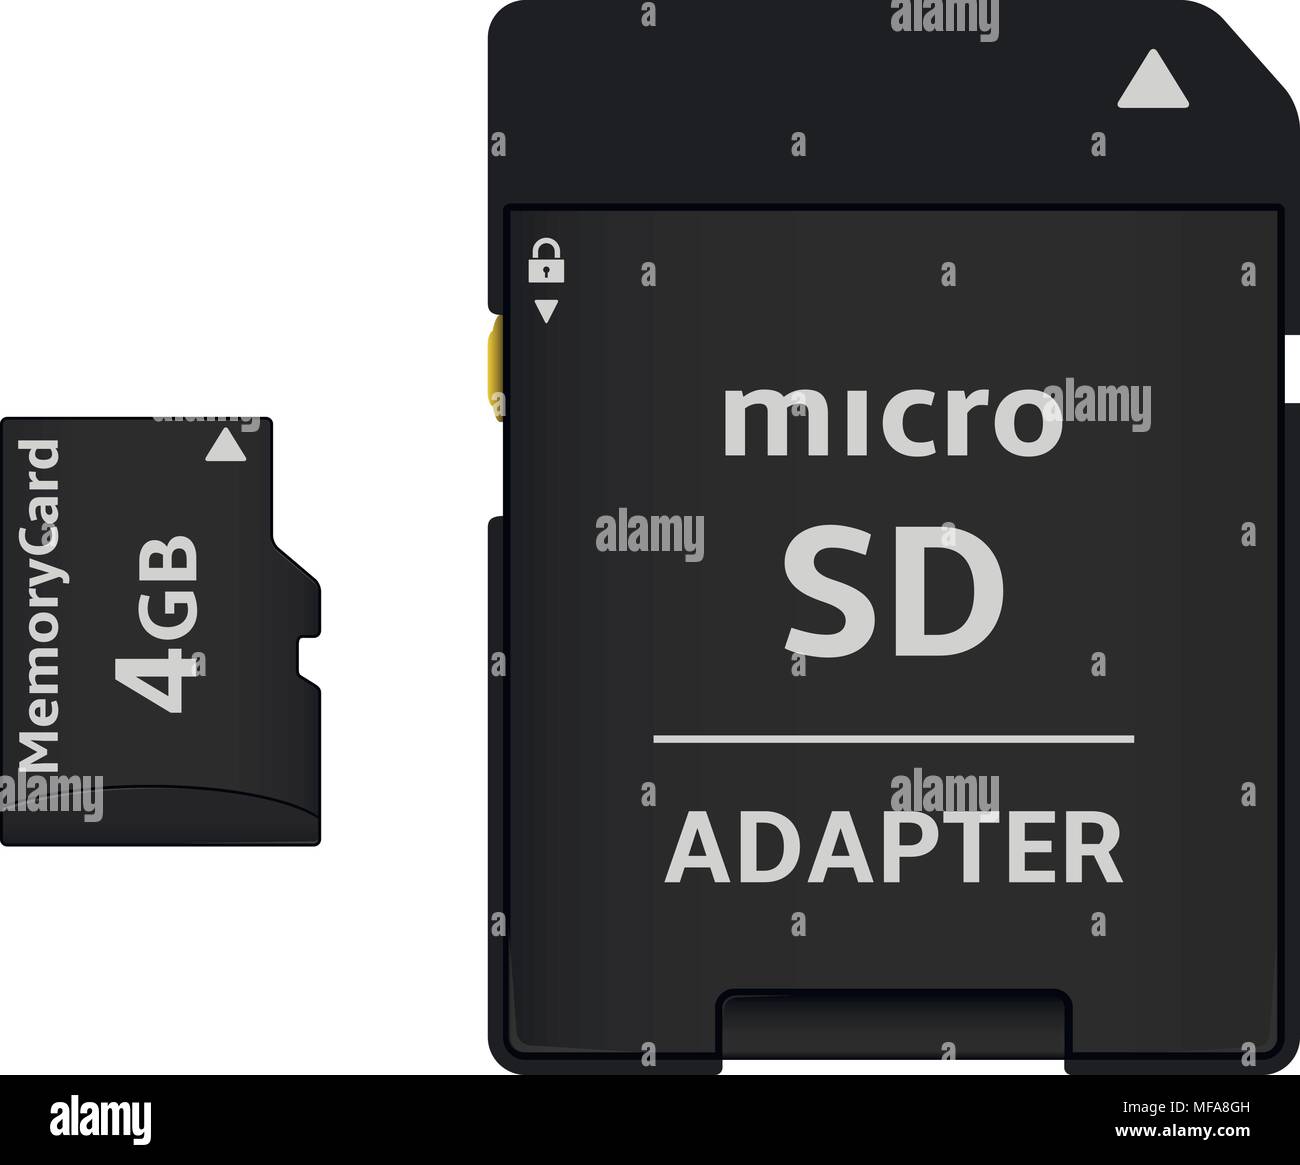 Micro SD card and adapter. Isolated on white background. Vector illustration. Stock Vector